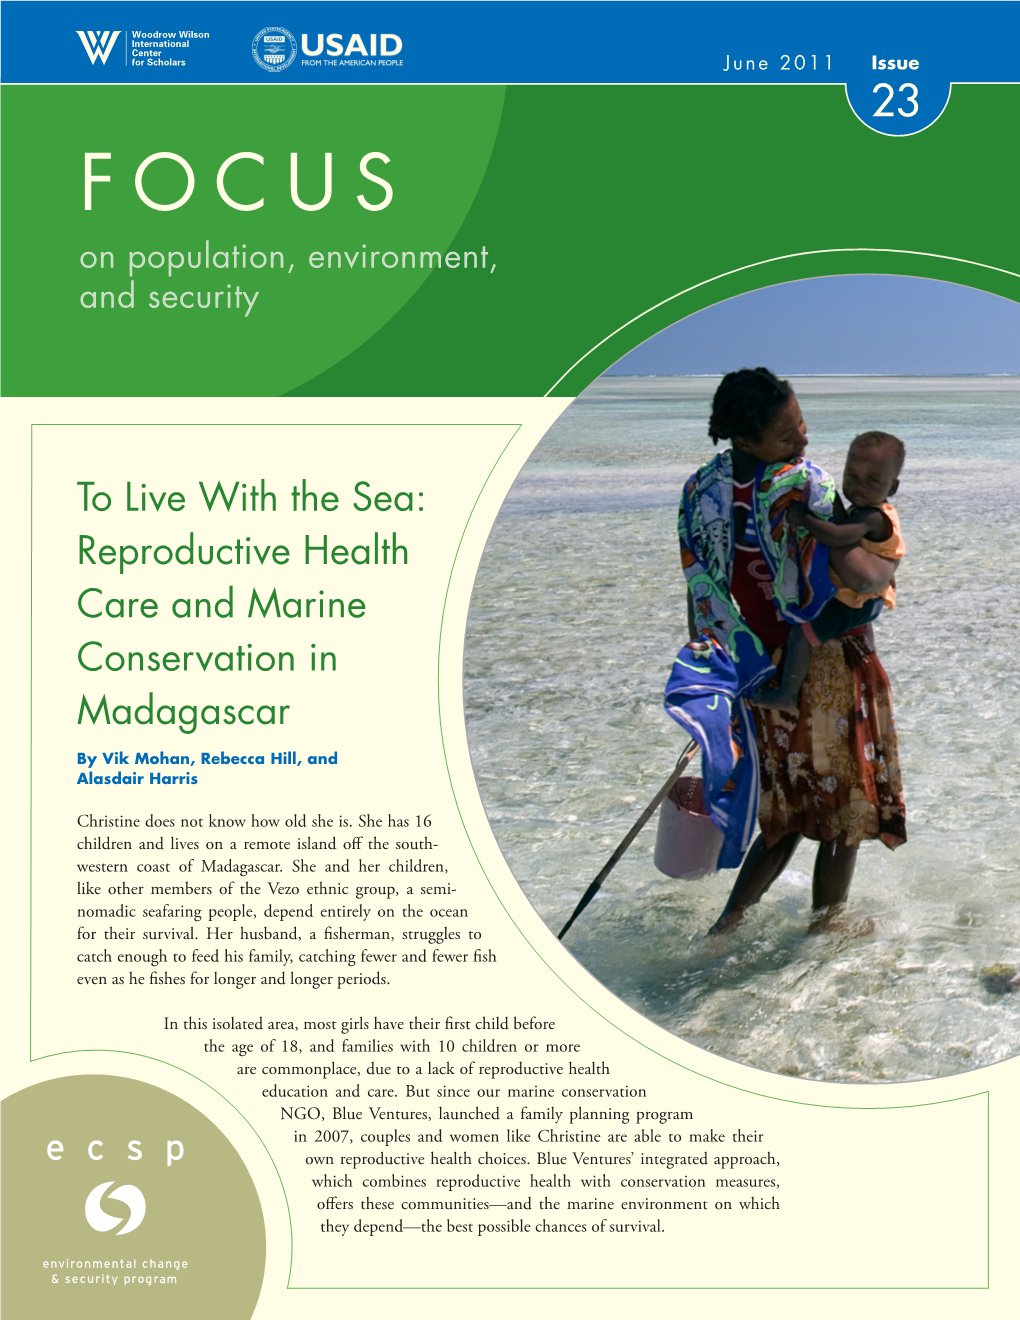 To Live with the Sea: Reproductive Health Care and Marine Conservation in Madagascar